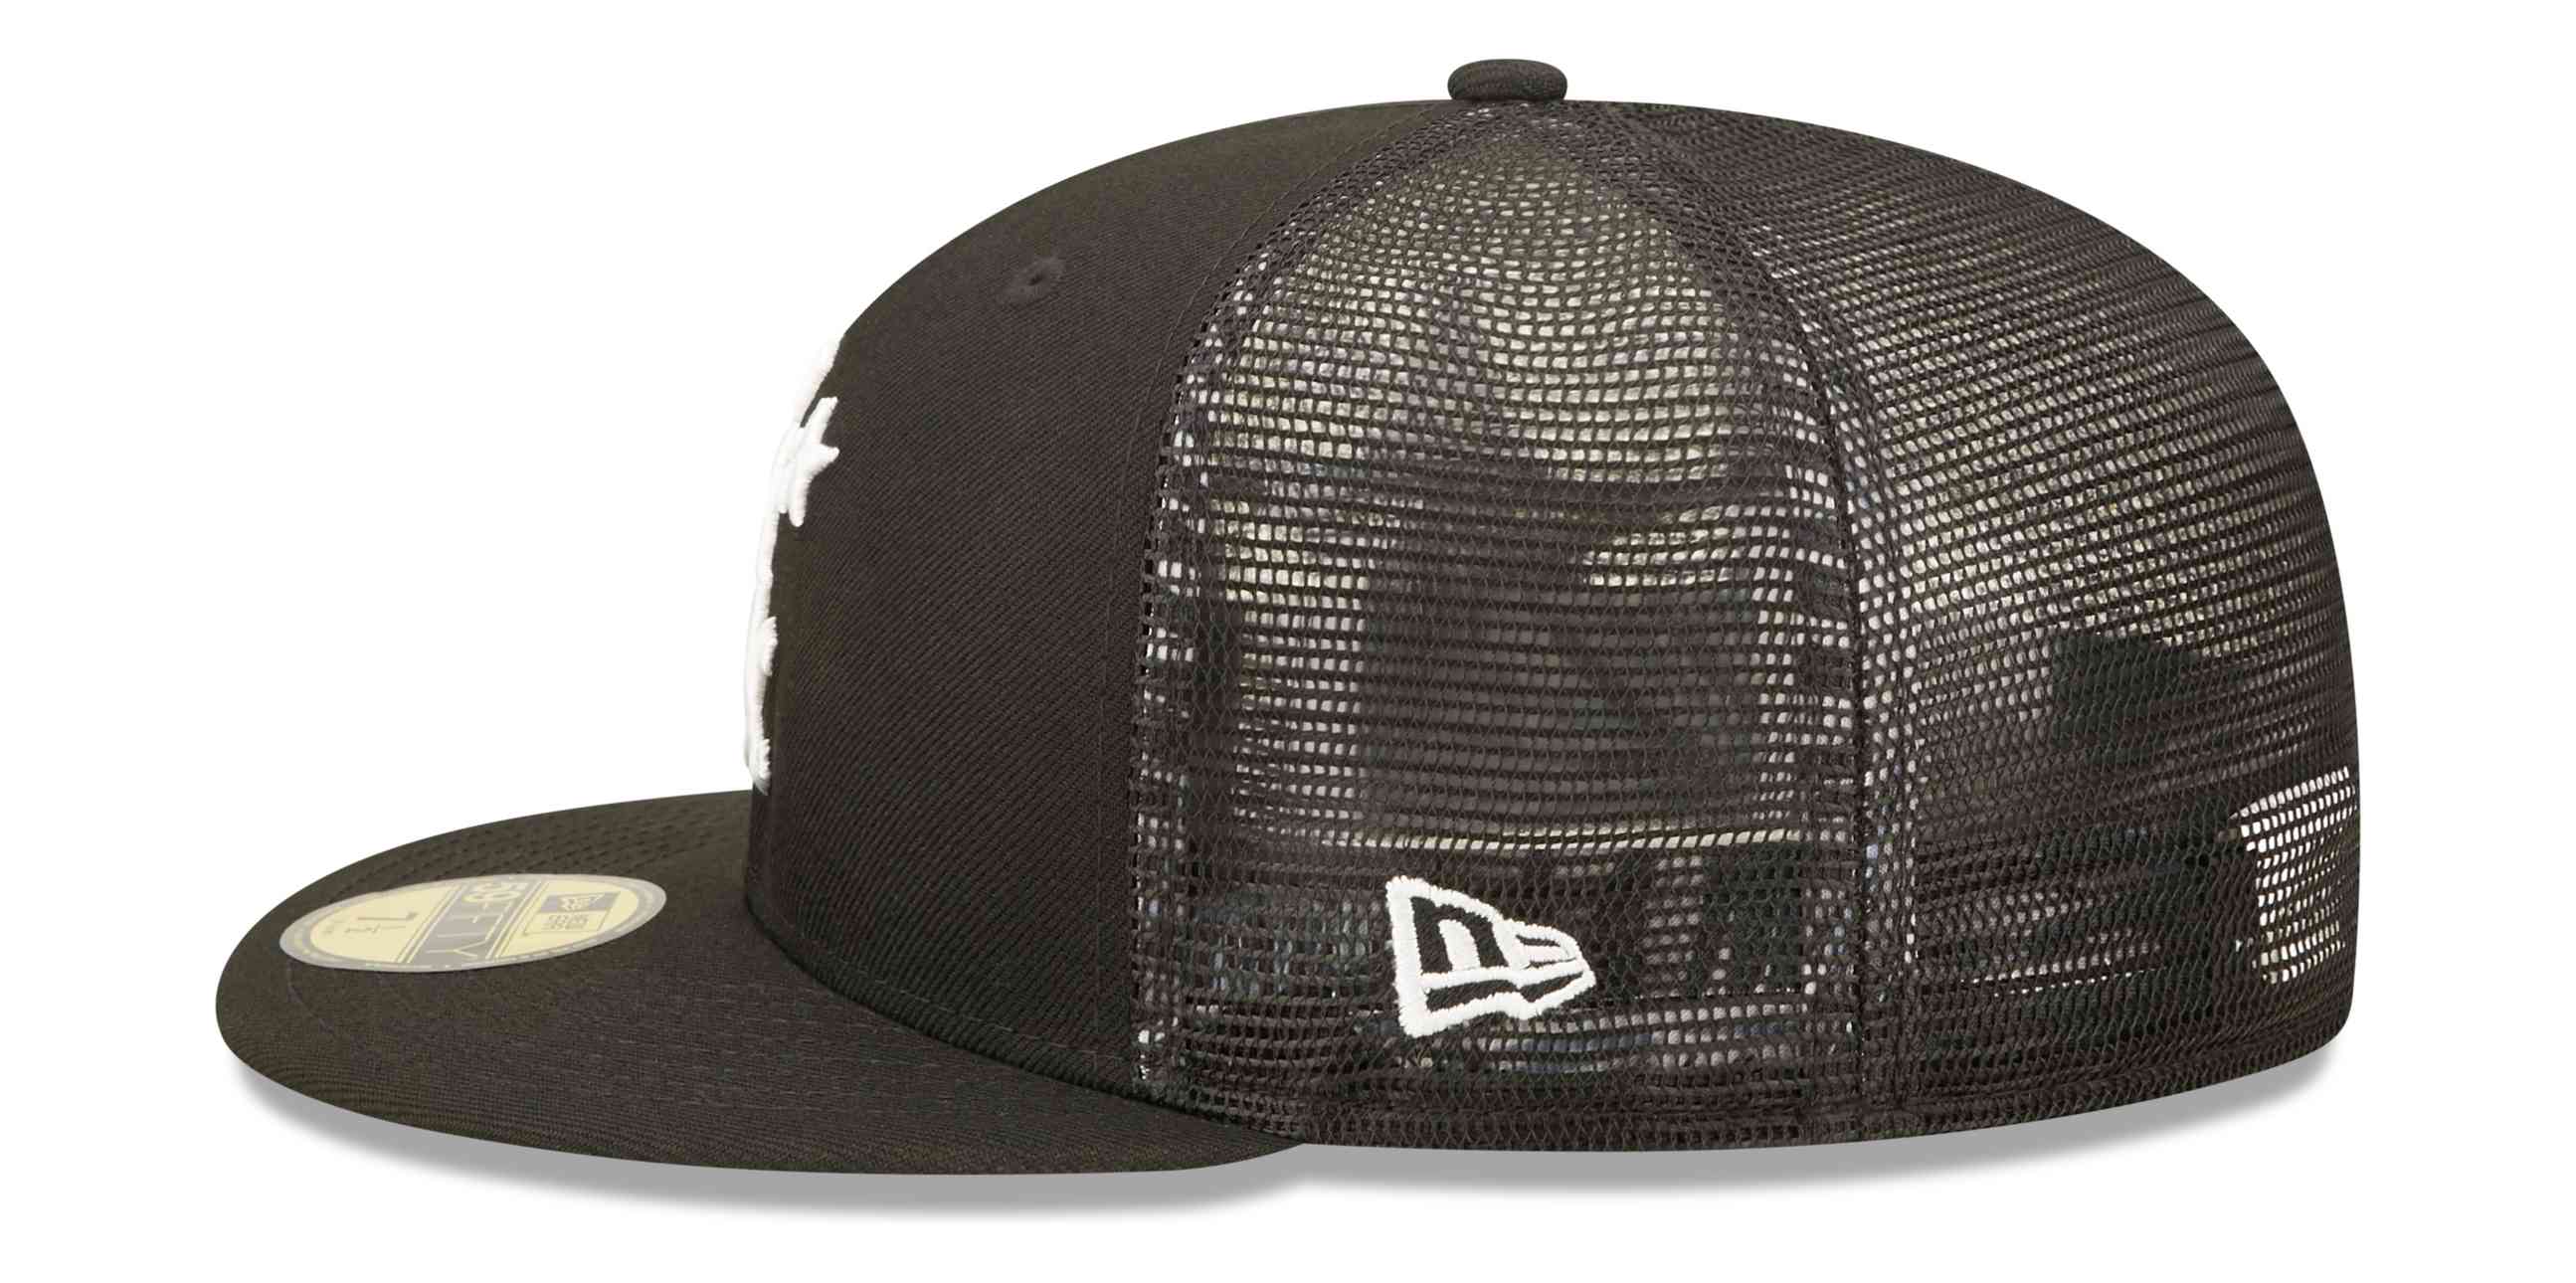 New Era - MLB Chicago White Sox 2022 All Star Game Workout 59Fifty Fitted Cap